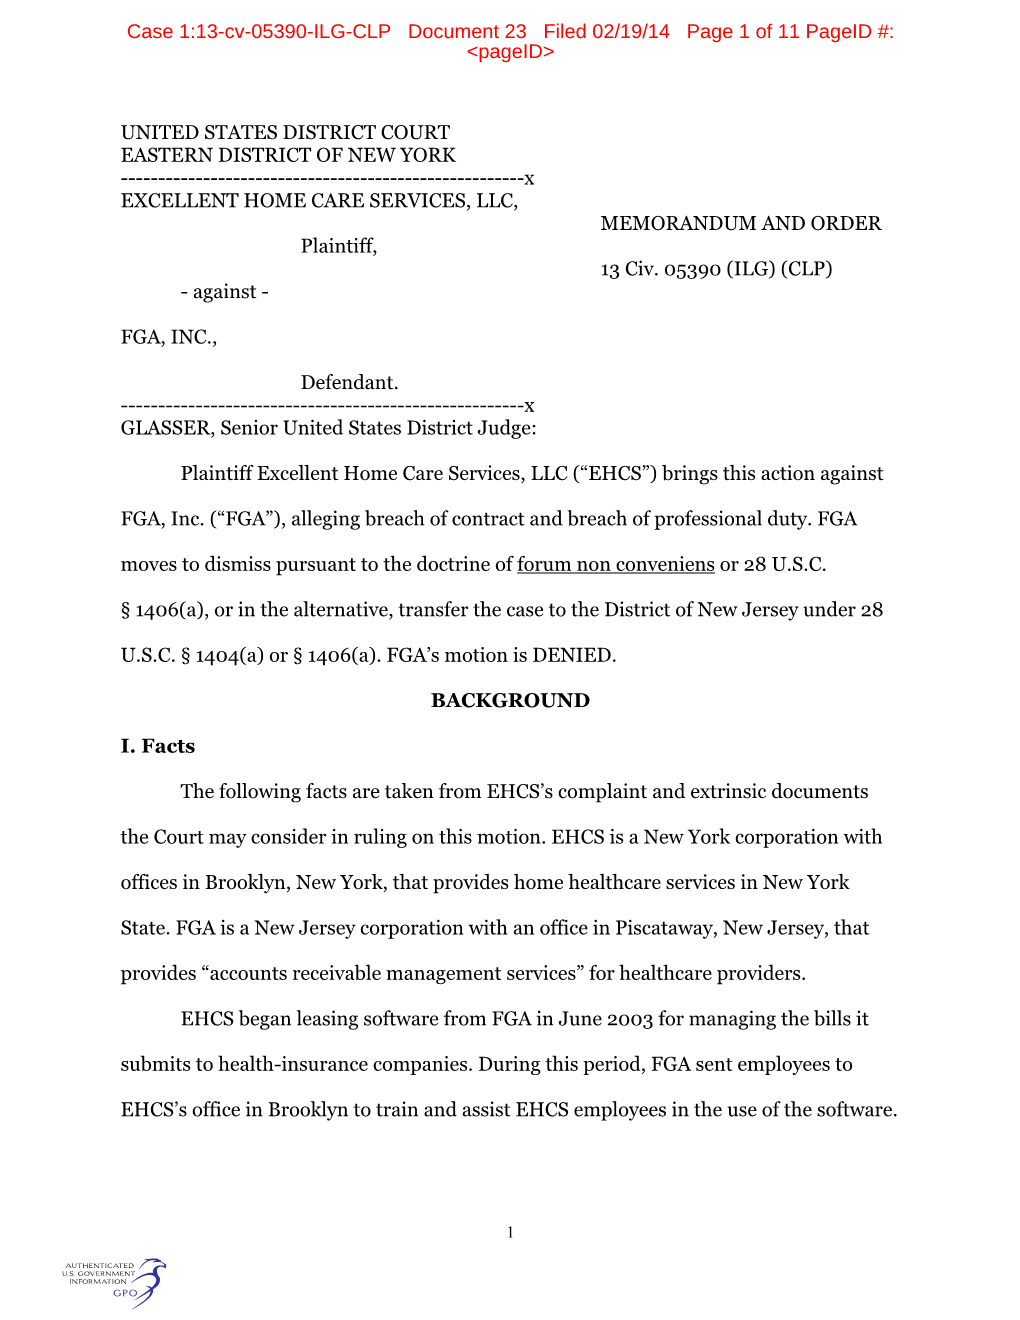 Case 1:13-Cv-05390-ILG-CLP Document 23 Filed 02/19/14 Page